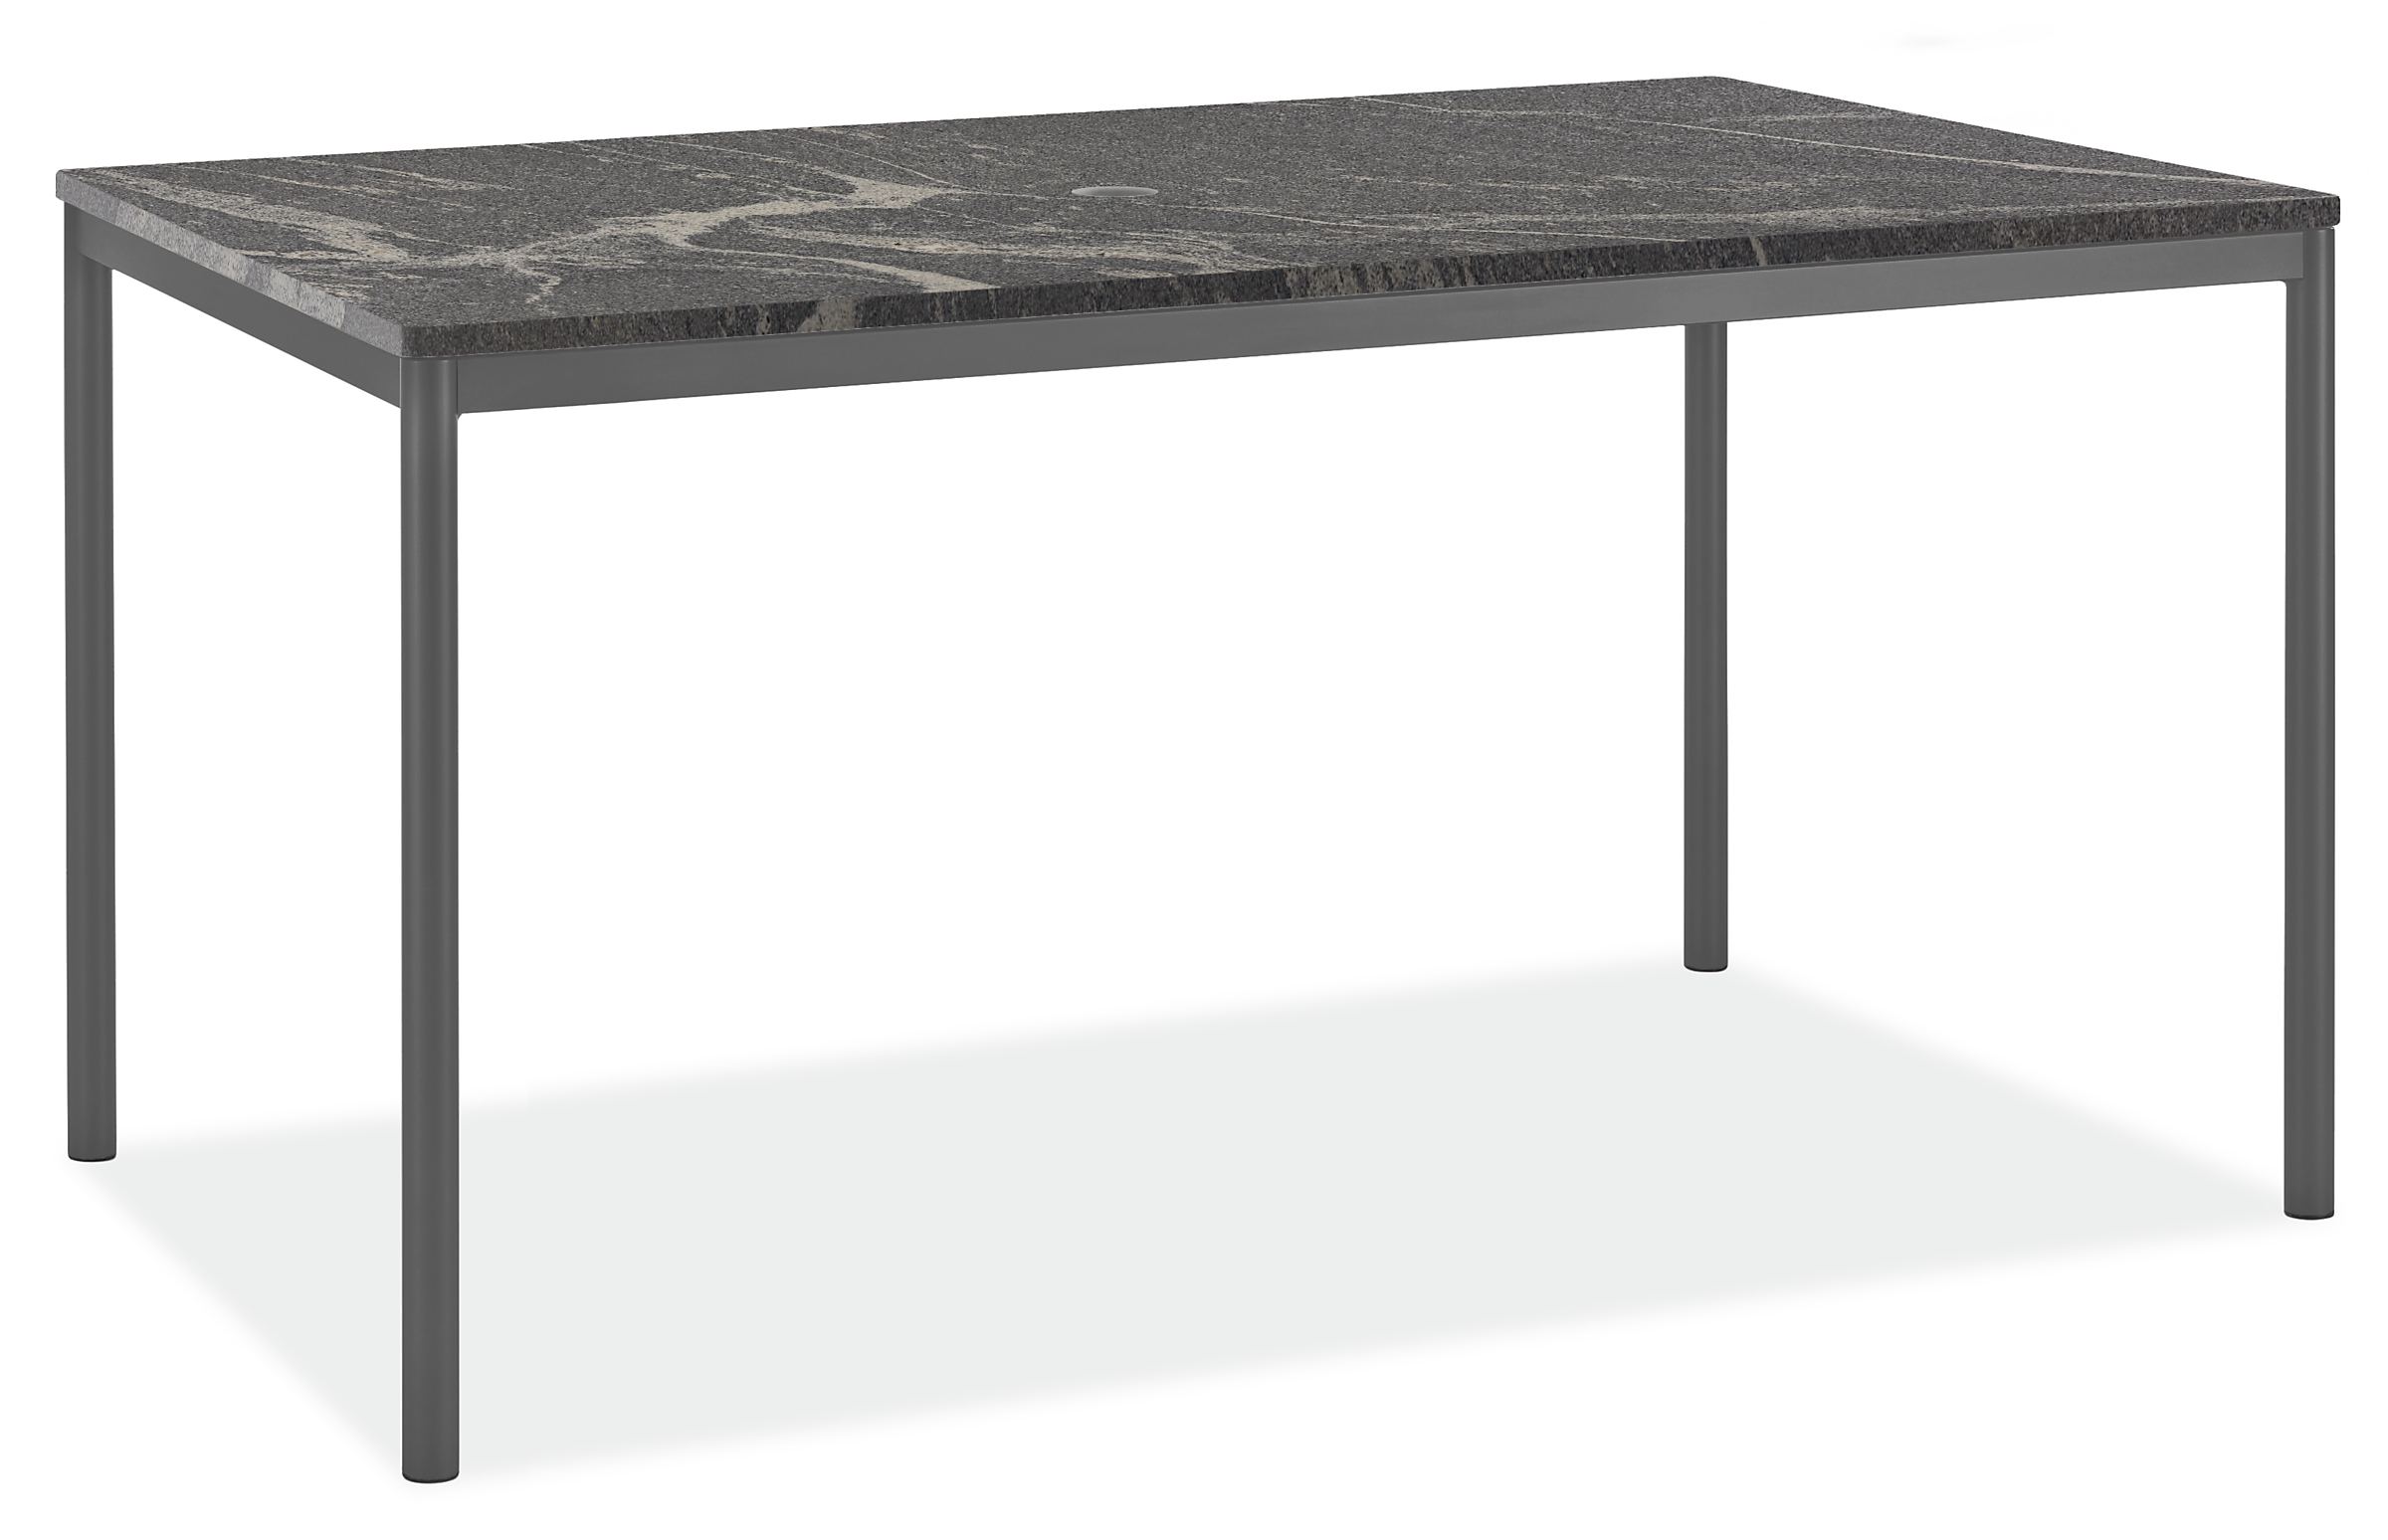 Westbrook 60w 36d Table with Umbrella Hole